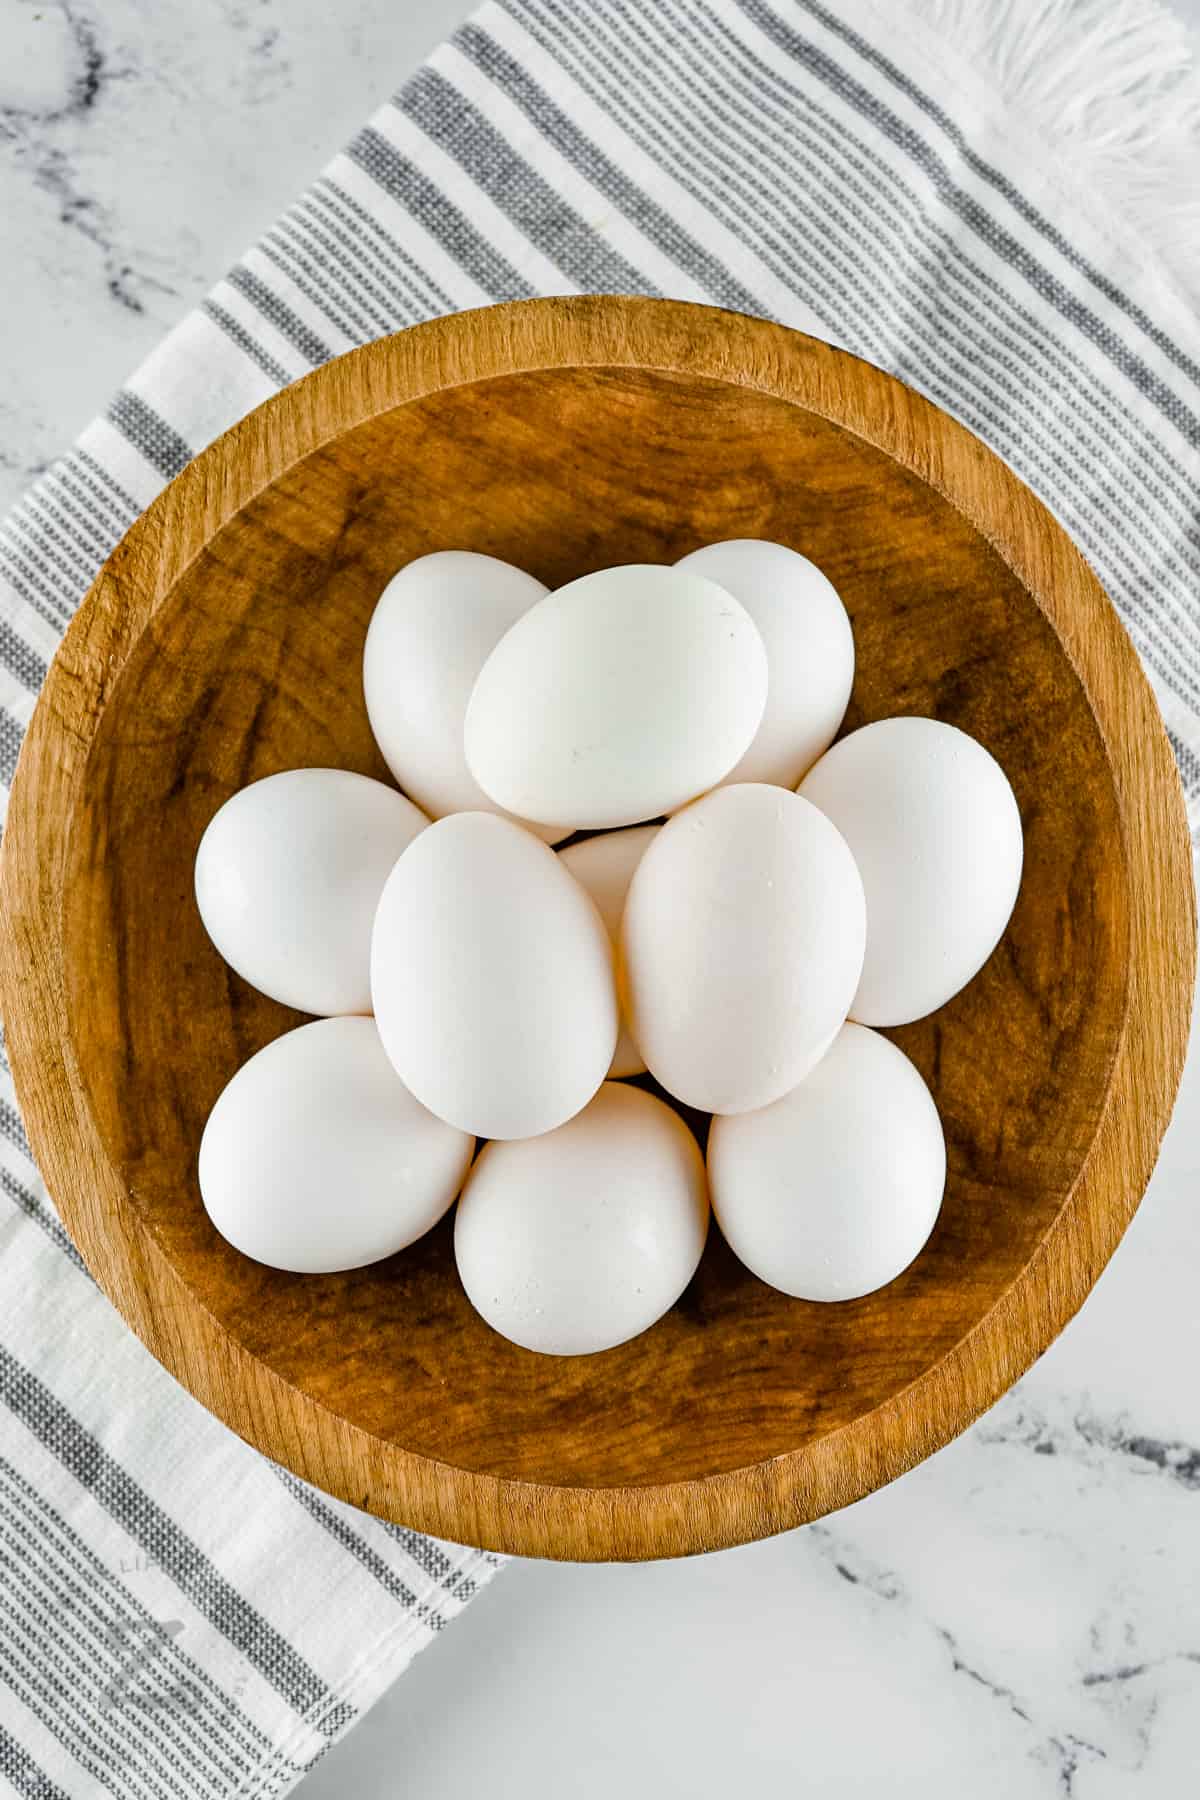 eggs in a basket to make Air Fryer Boiled Eggs